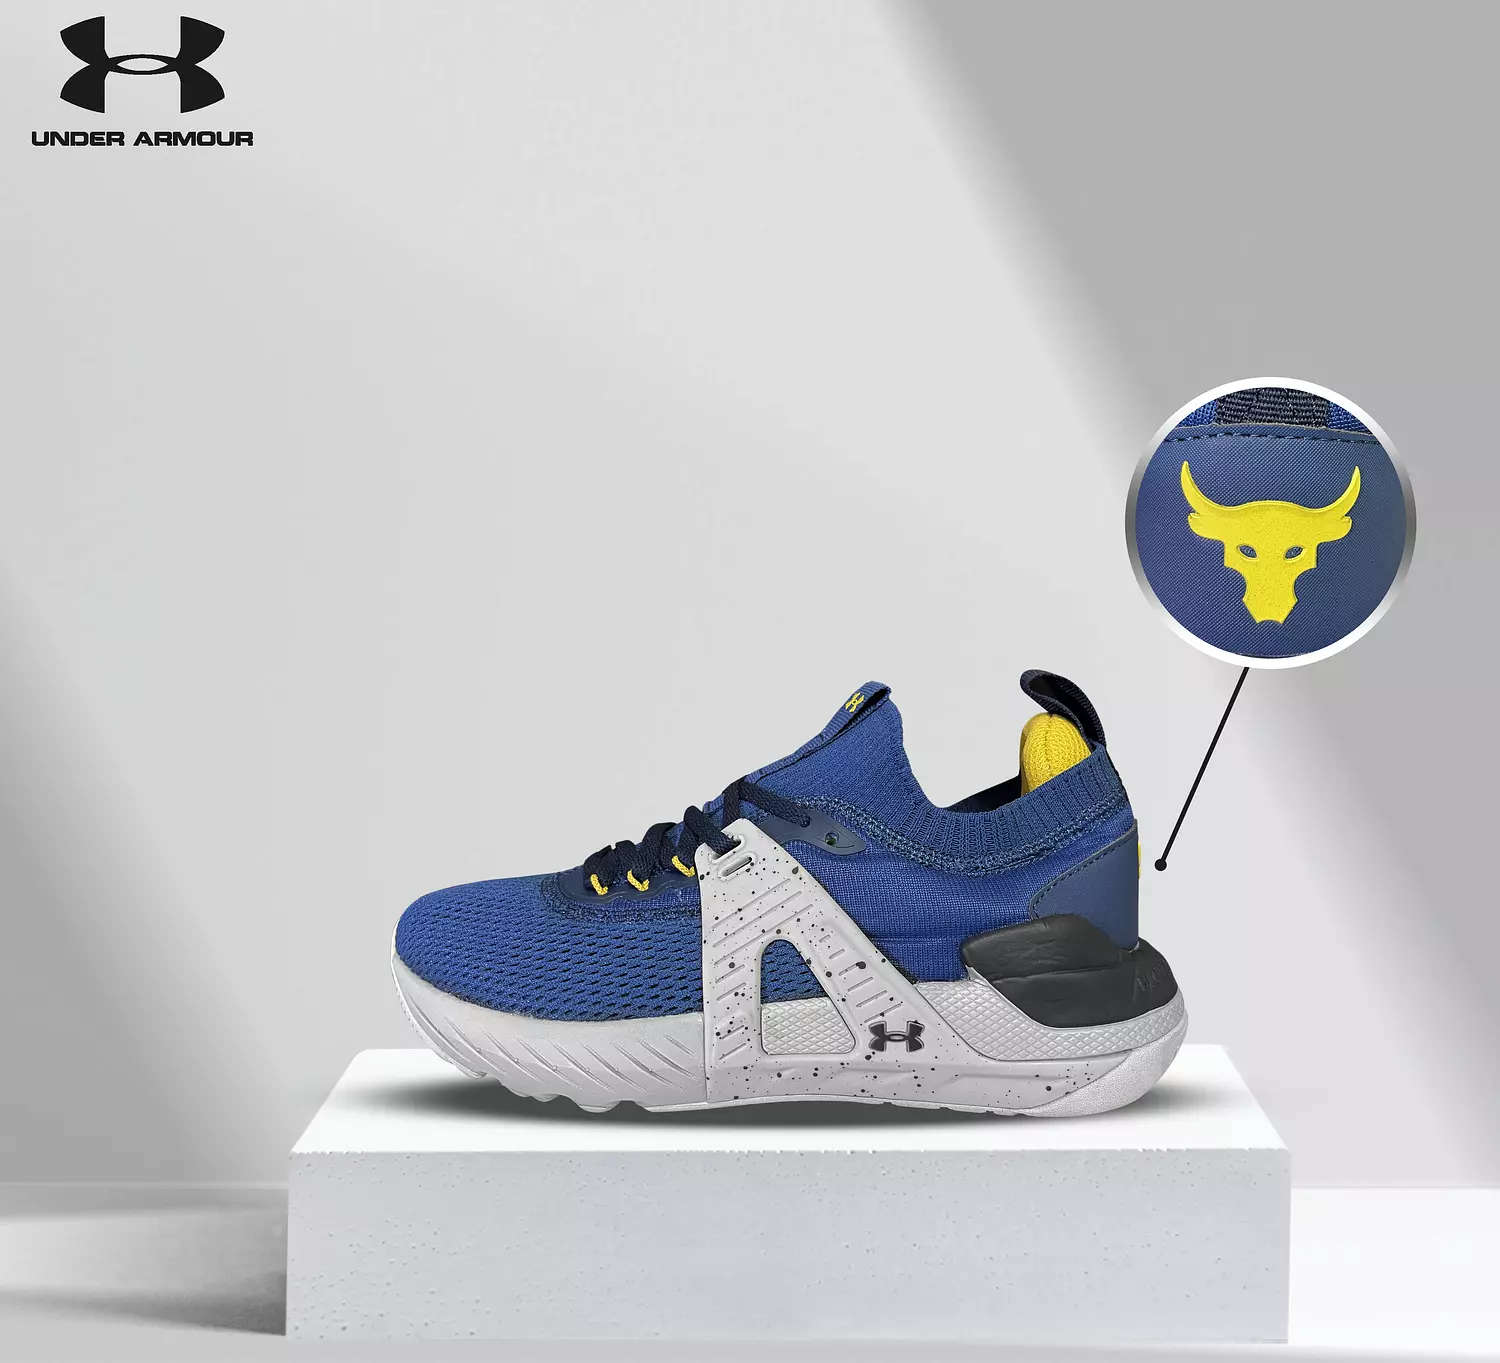 UNDER ARMOUR RUNNING SHOES hover image